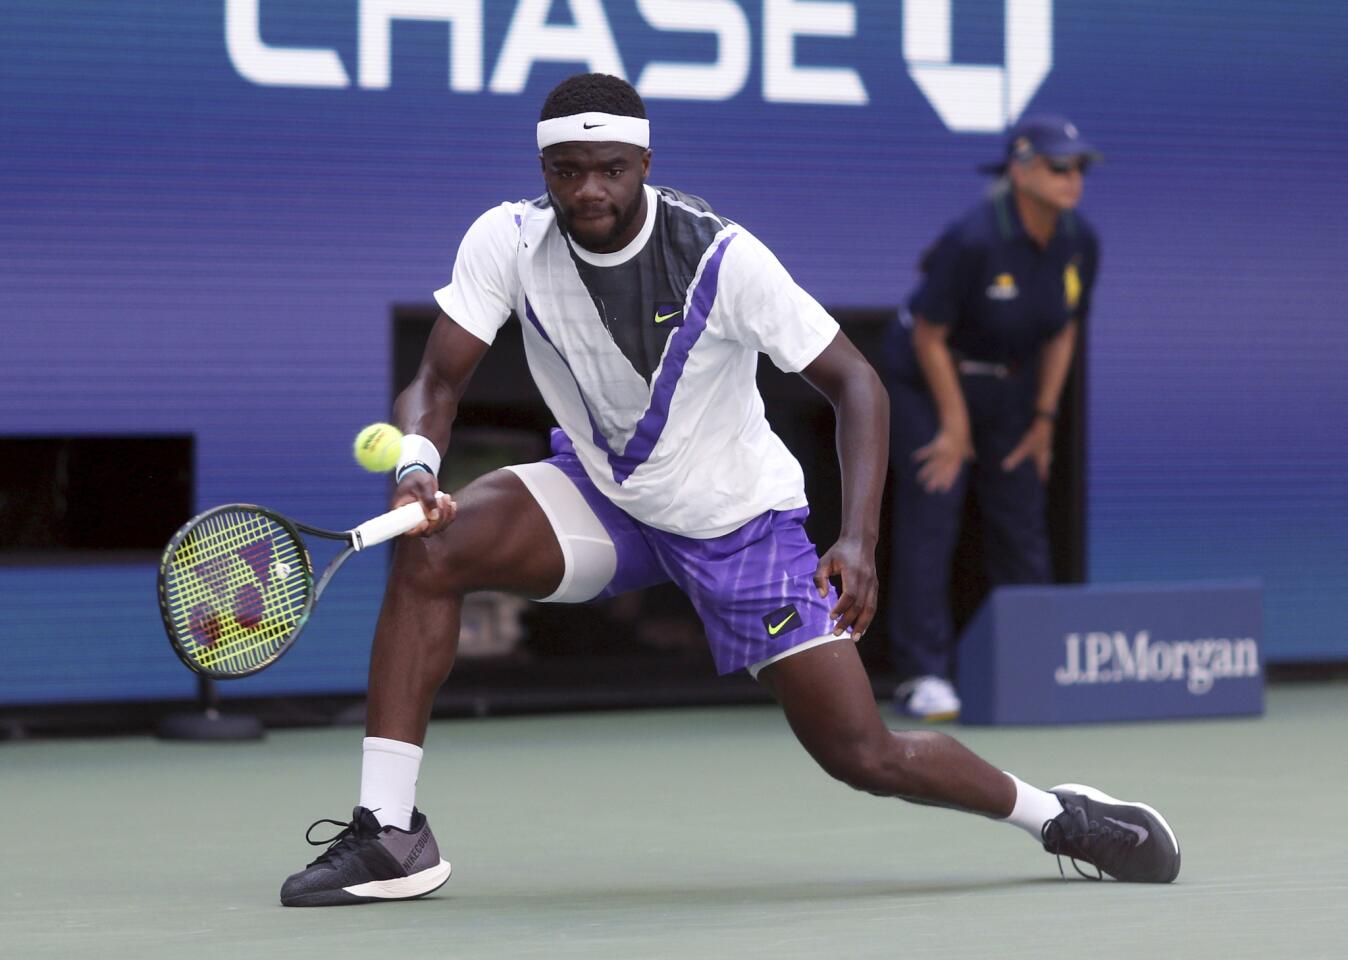 Frances Tiafoe returns a shot to Alexander Zverev during the second round match on Day 4 of the 2019 U.S. Open at the USTA Billie Jean King National Tennis Center on Aug.29, 2019, in Queens.